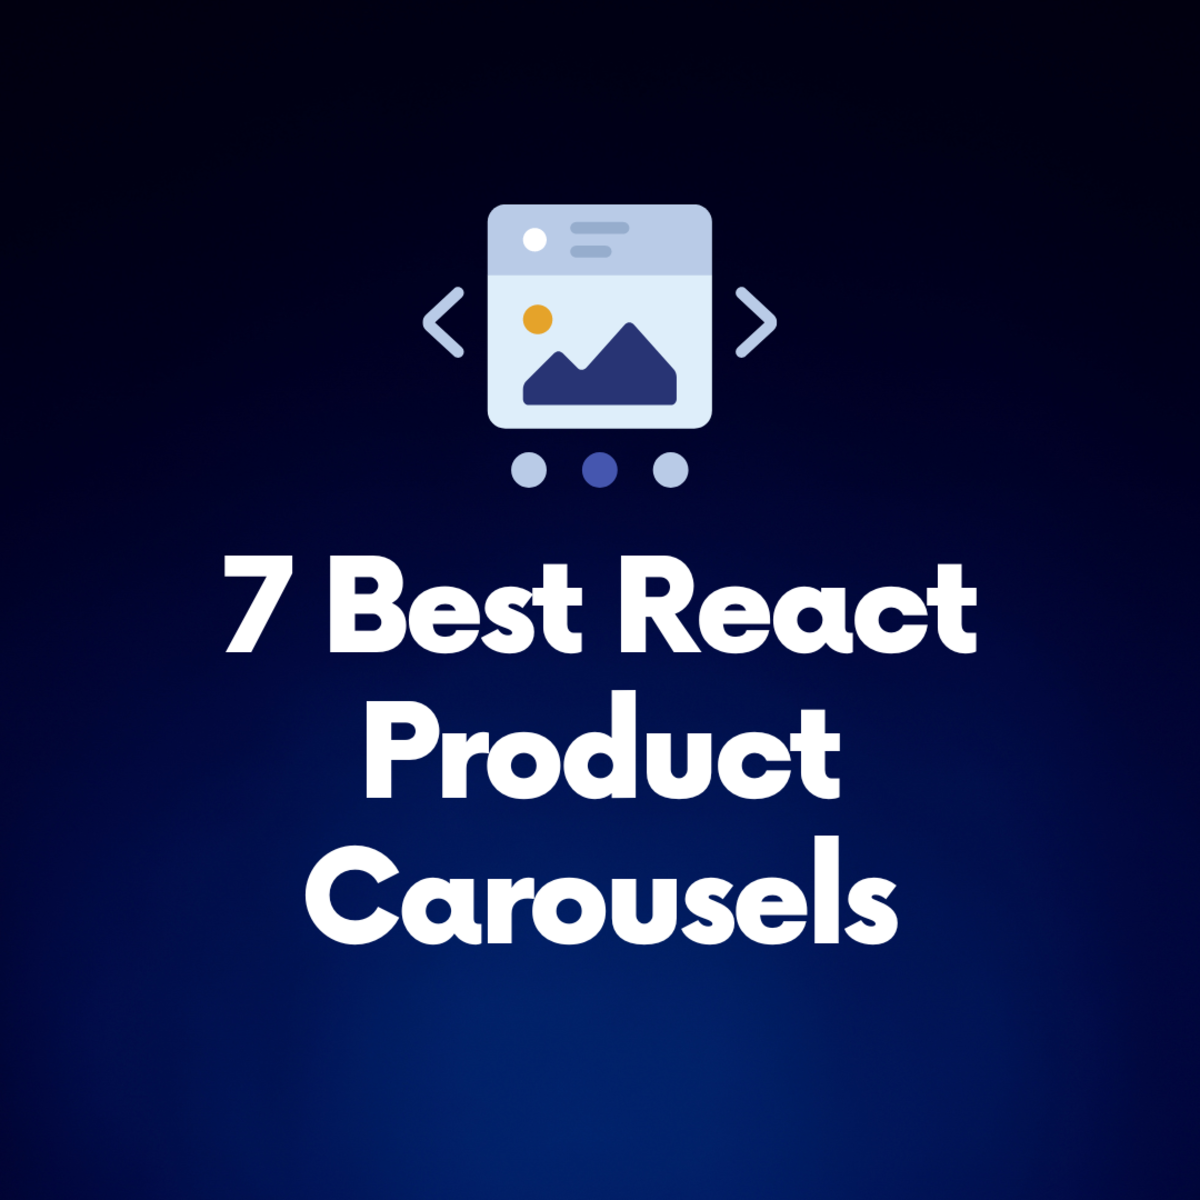 7 Best React Product Carousels: The Ultimate List